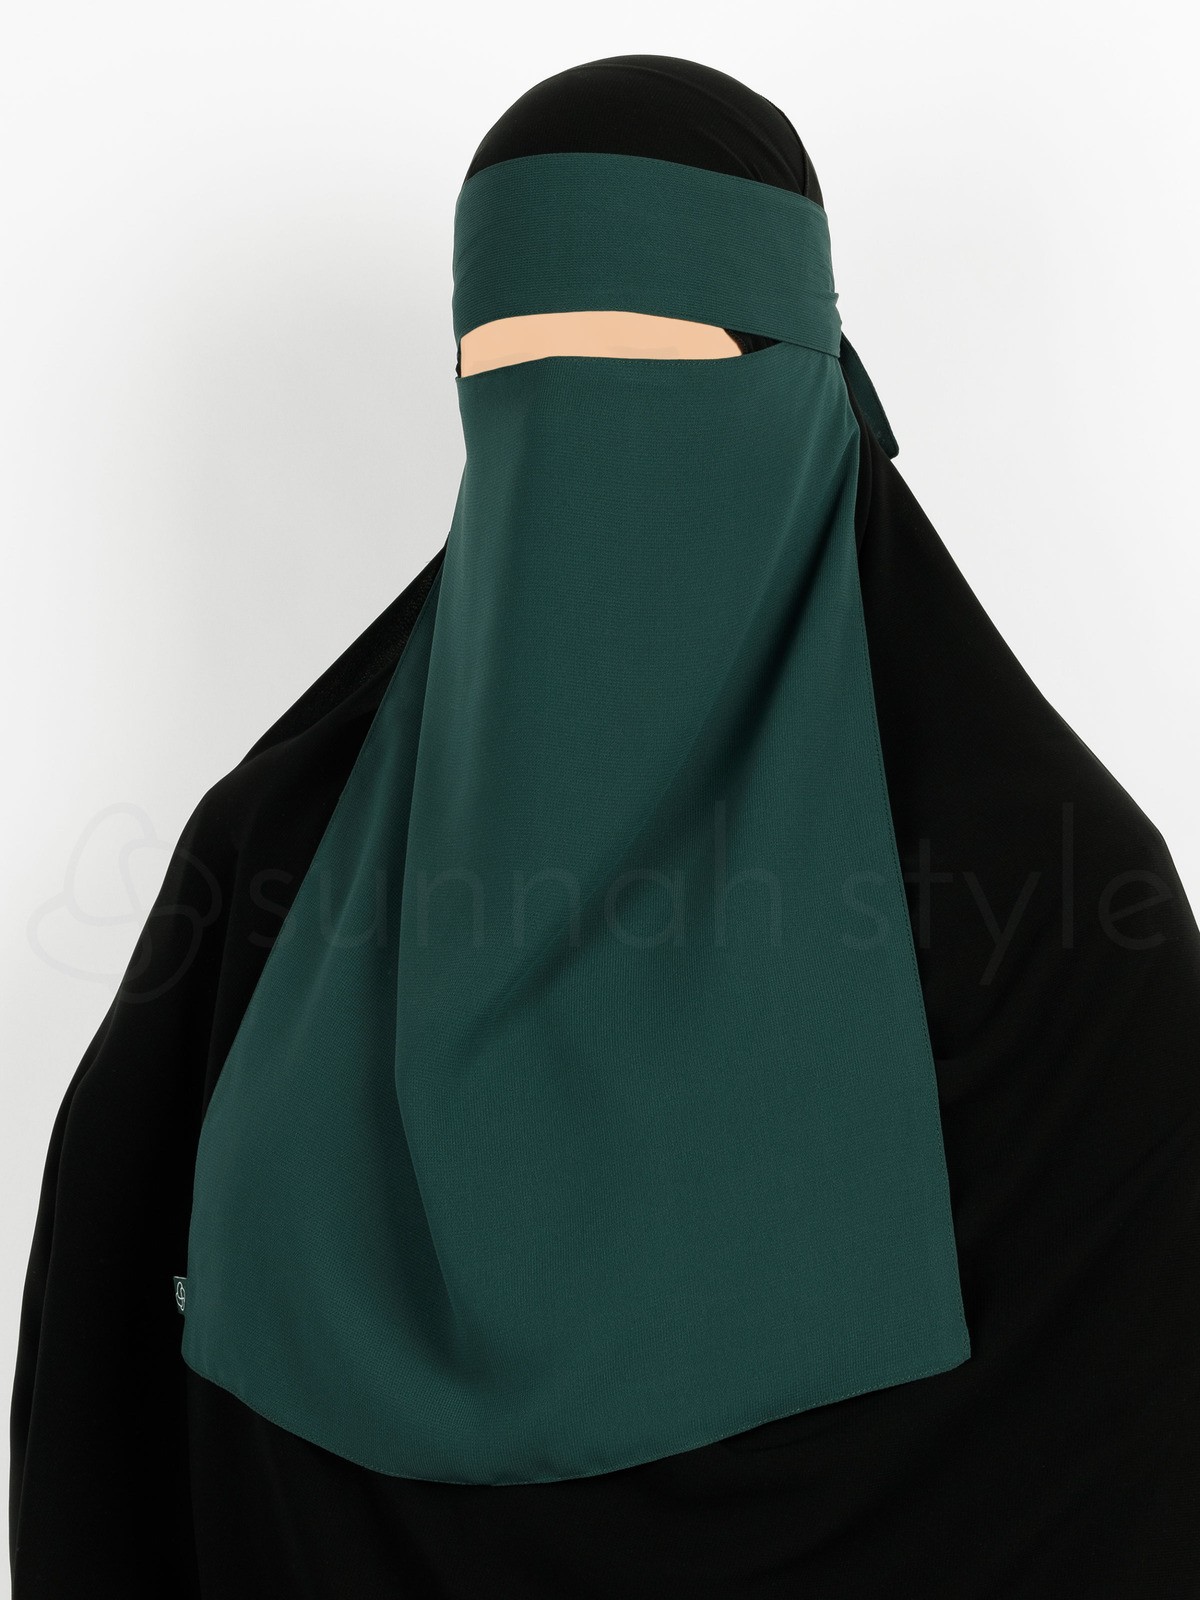 Sunnah Style - Pull-Down One Layer Niqab (Parfait)